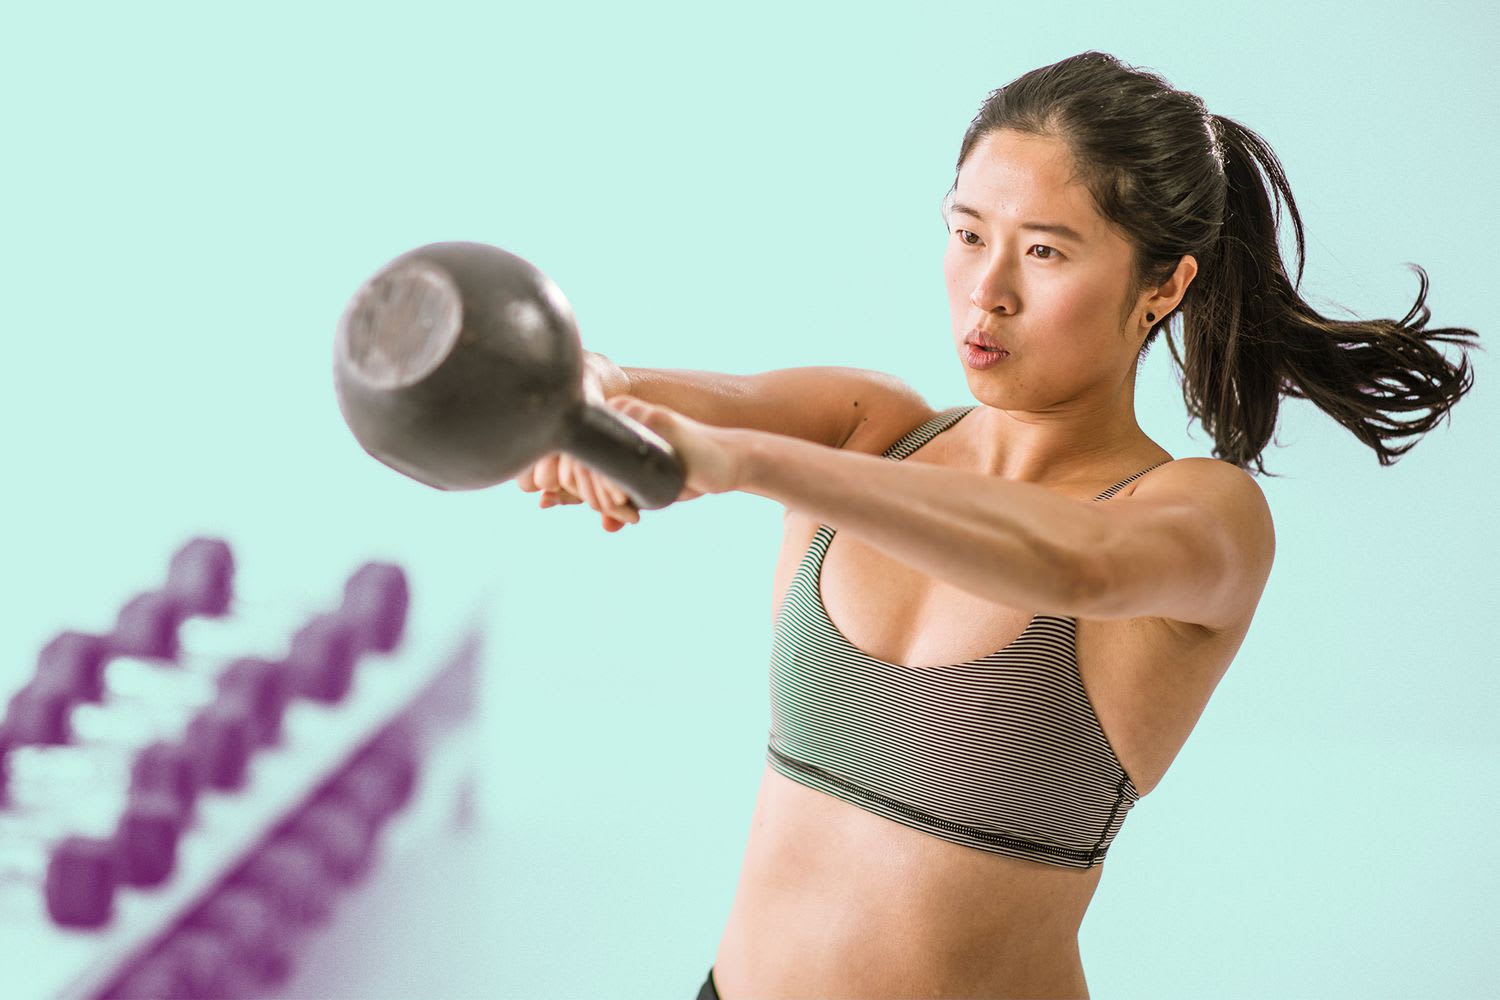 How to Do a Kettlebell Swing to Boost Your Strength and Cardiovascular Health